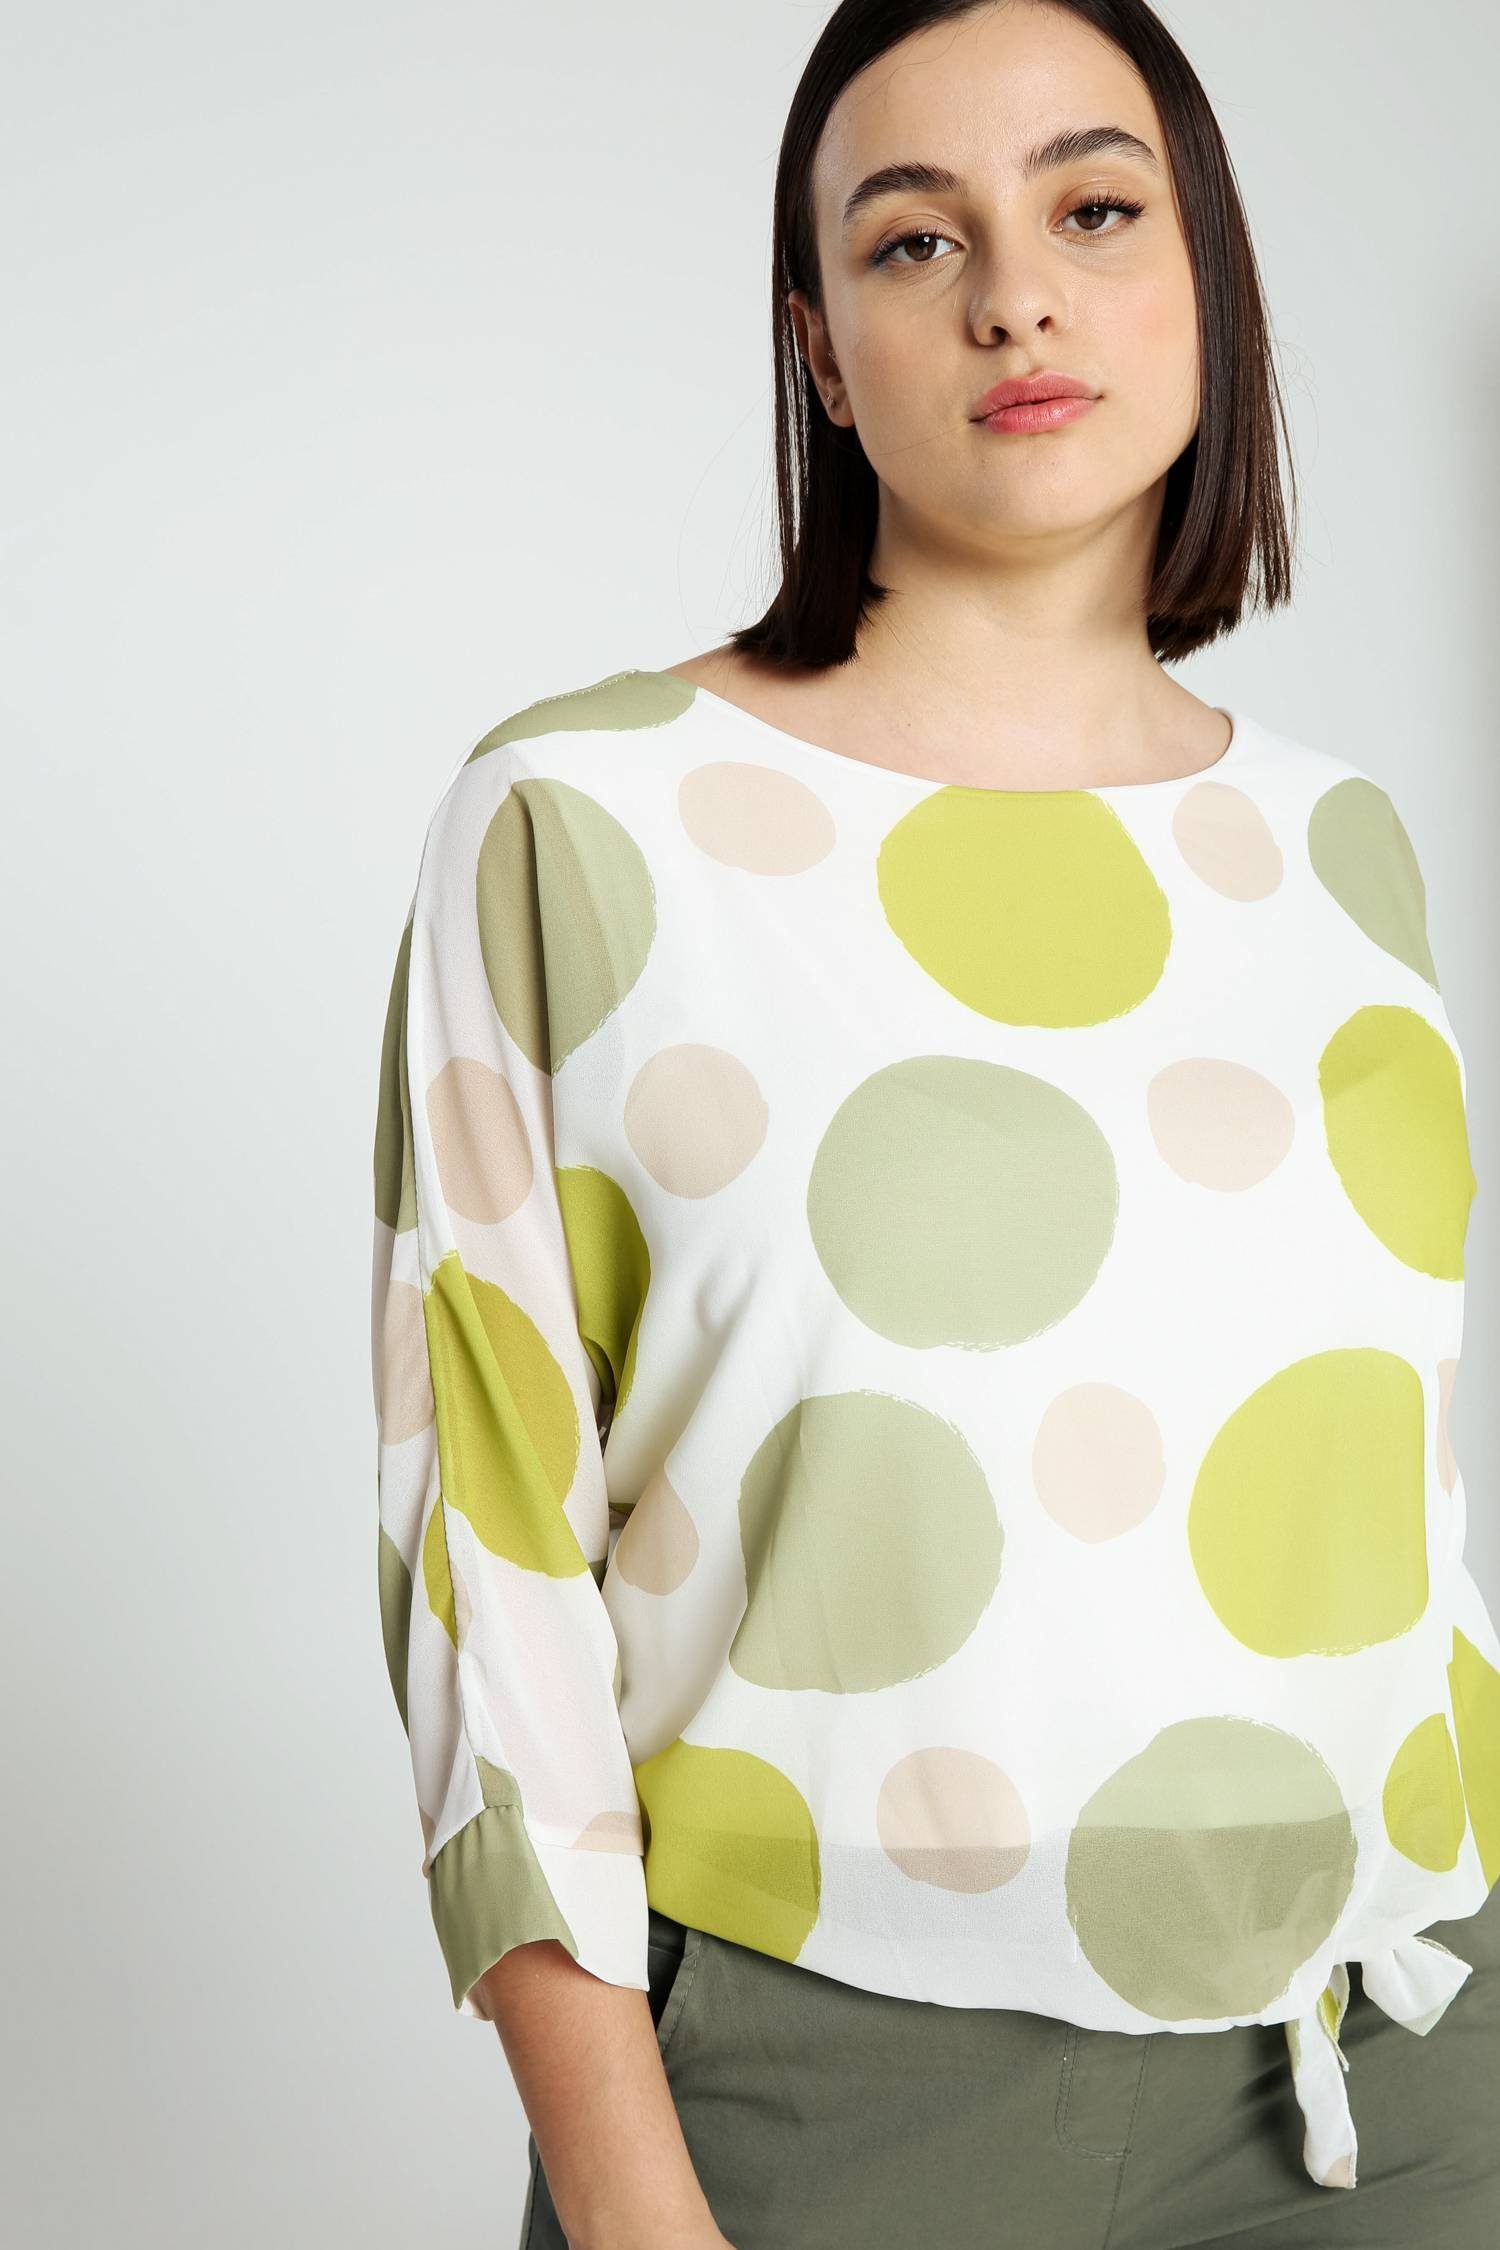 (1-tlg) Polka-Dot-Muster In Knopf Ballonform Cassis Mit Und Shirtbluse Bluse